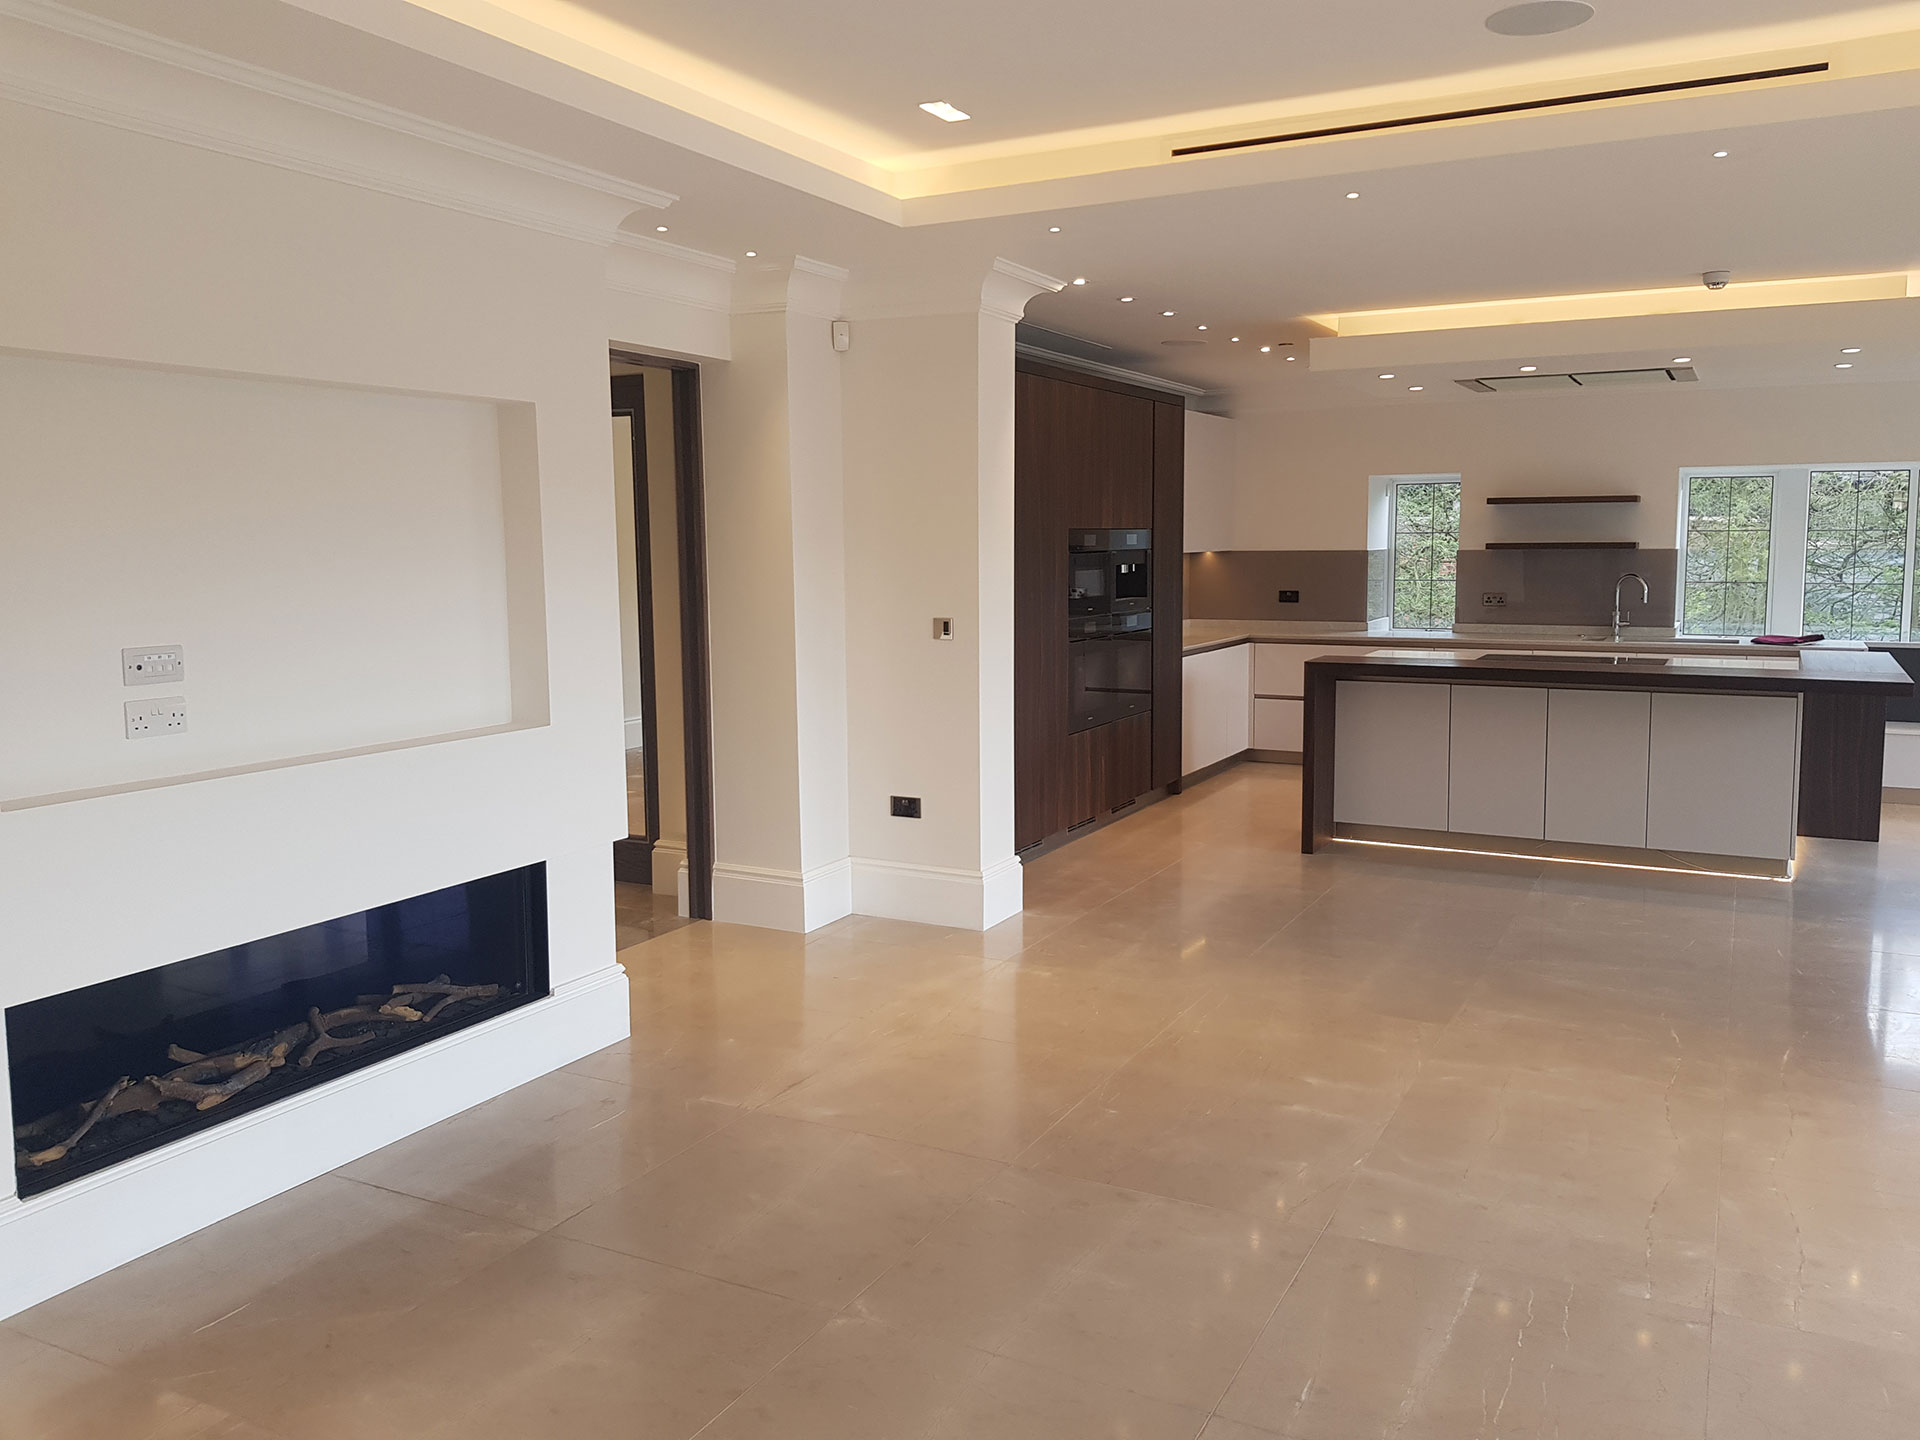 Penthouse from the Cheshire and South Manchester Extension and House Builder